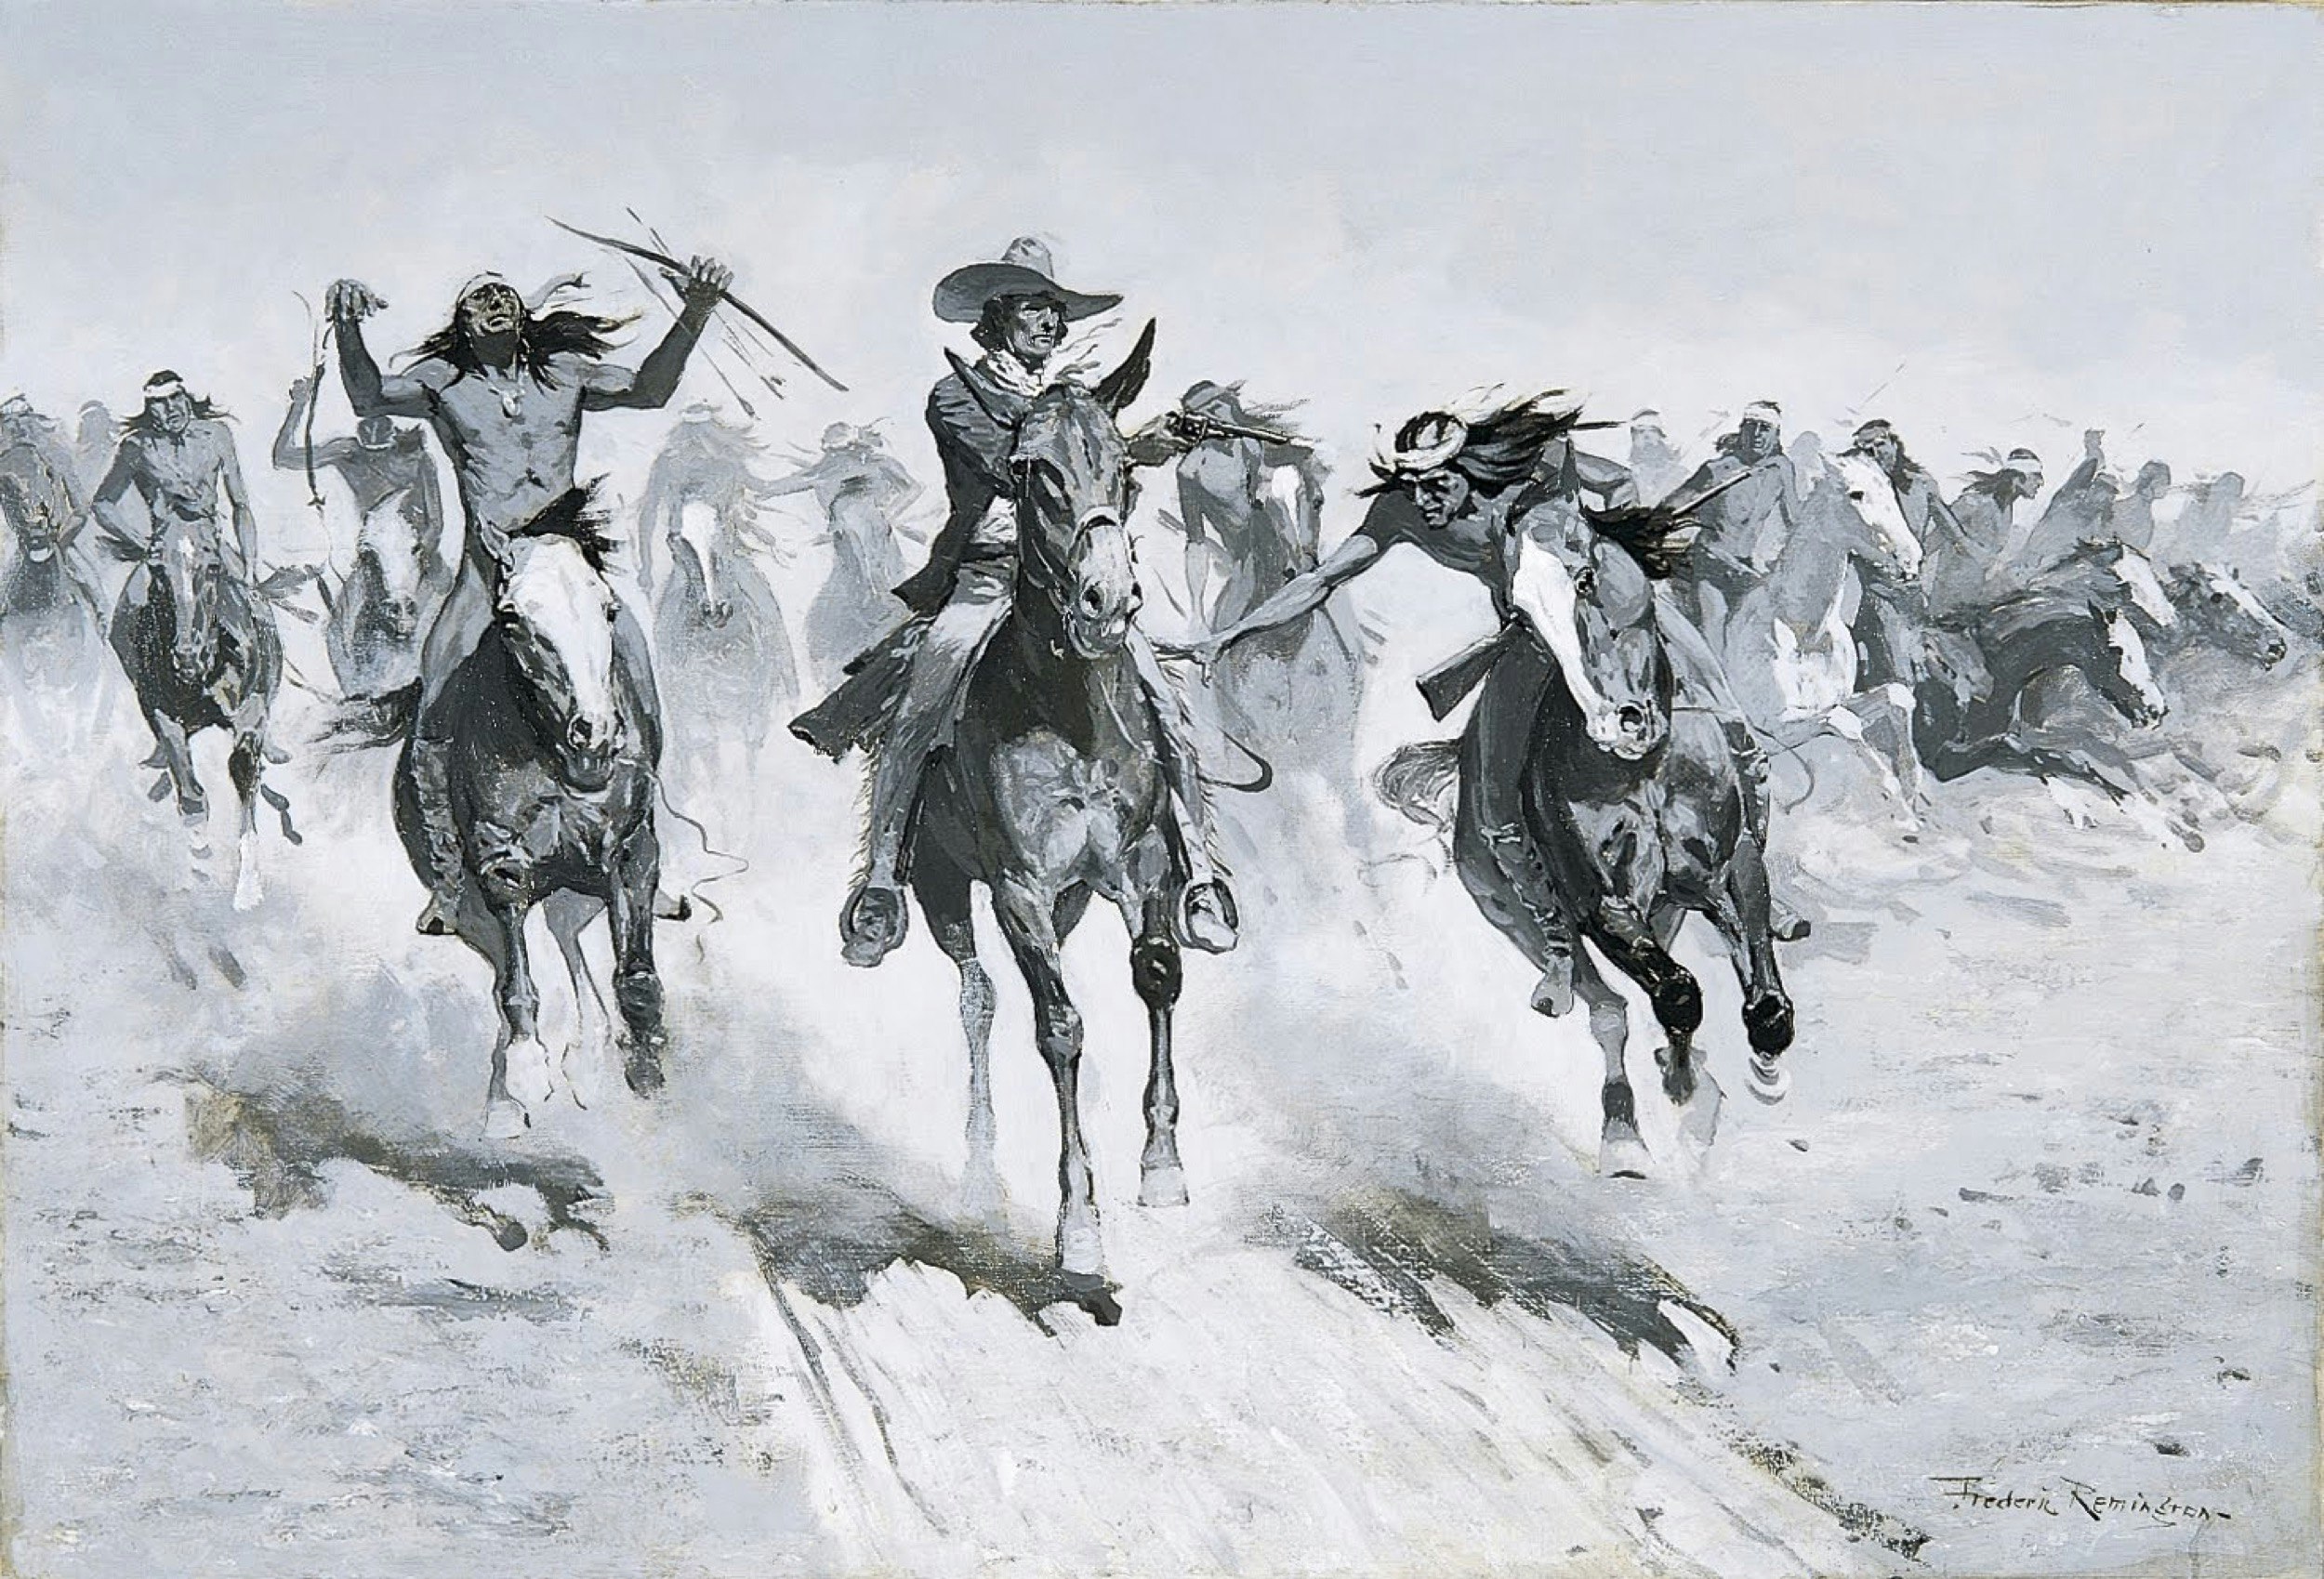 A black and white oil painting shows a Native American in the gruesome act of being shot while a band chases after a cowboy; Where to see Remington in America